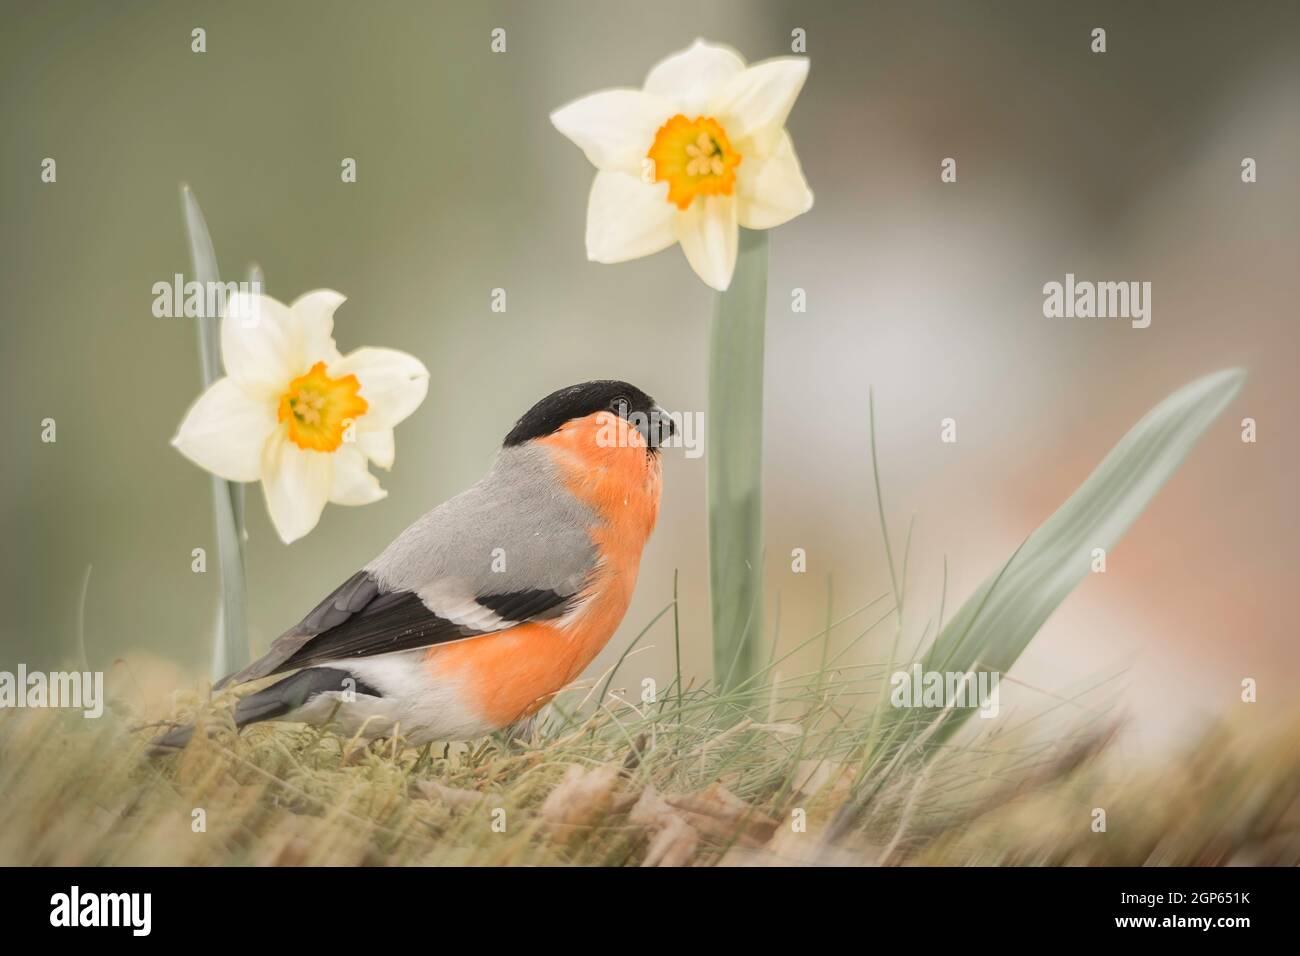 close up of  male bullfinch on moss with daffodil flowers Stock Photo